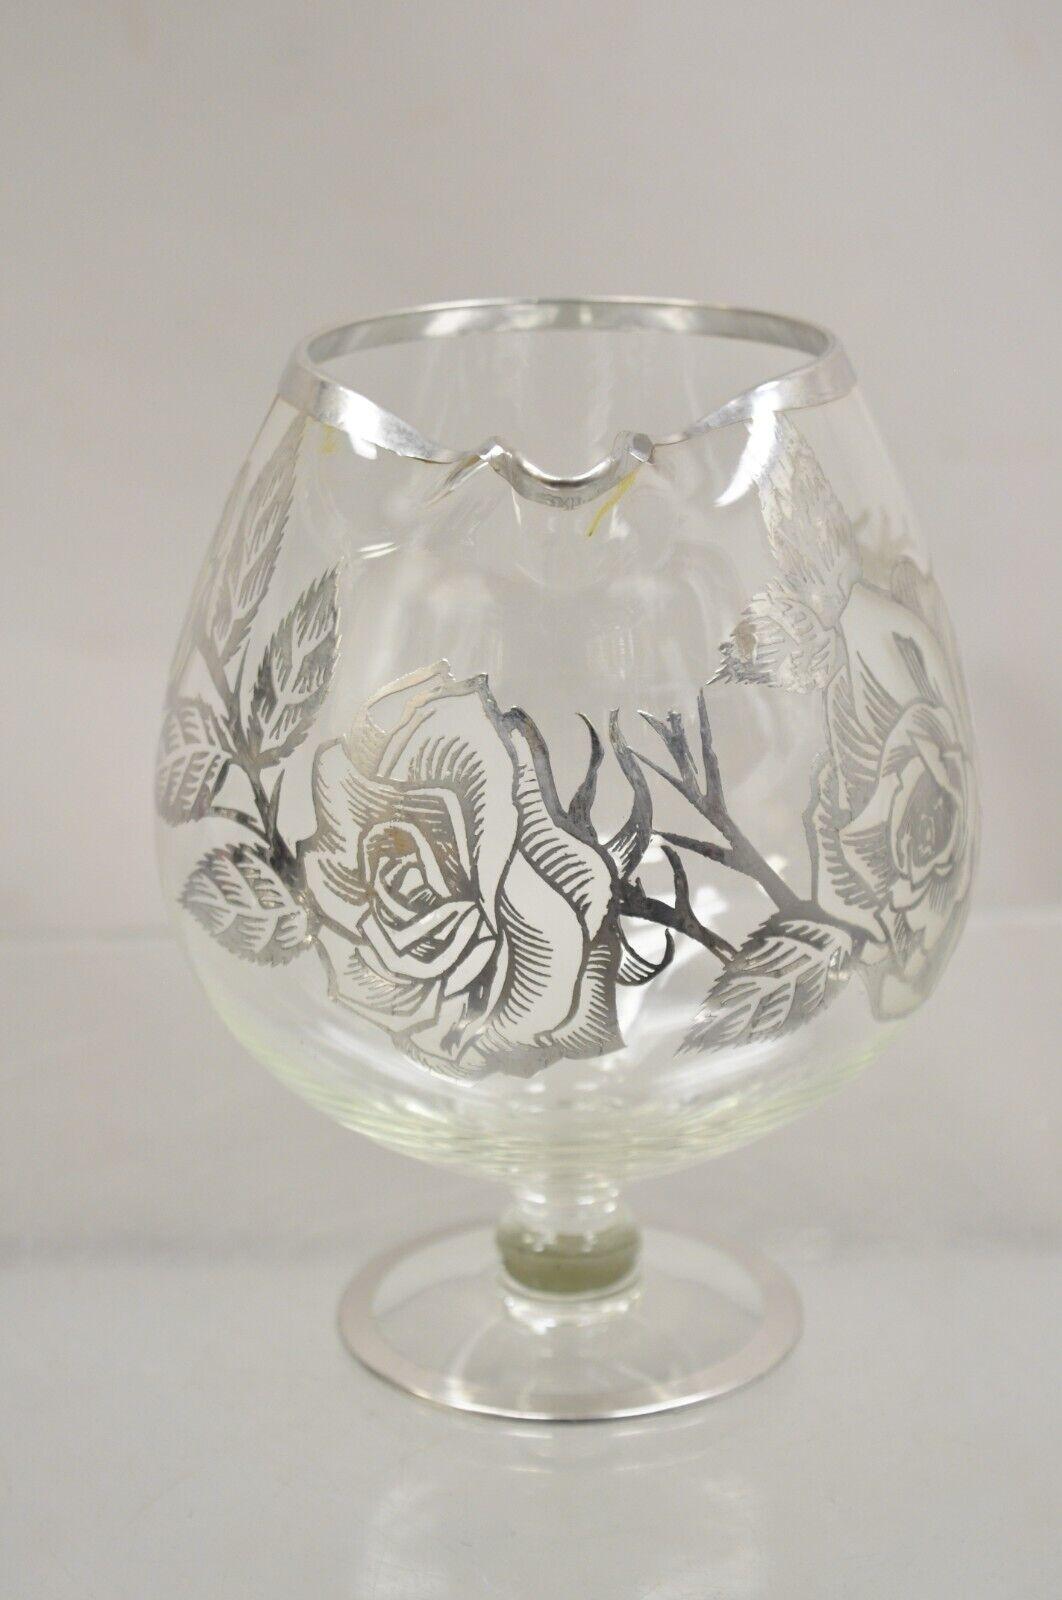 Vintage Cambridge Art Nouveau Floral Sterling Silver Overlay Glass Footed Water Pitcher. Item features blown glass base, sterling silver overlay, very nice vintage pitcher. Circa Early to Mid 20th Century. Measurements: 7.5